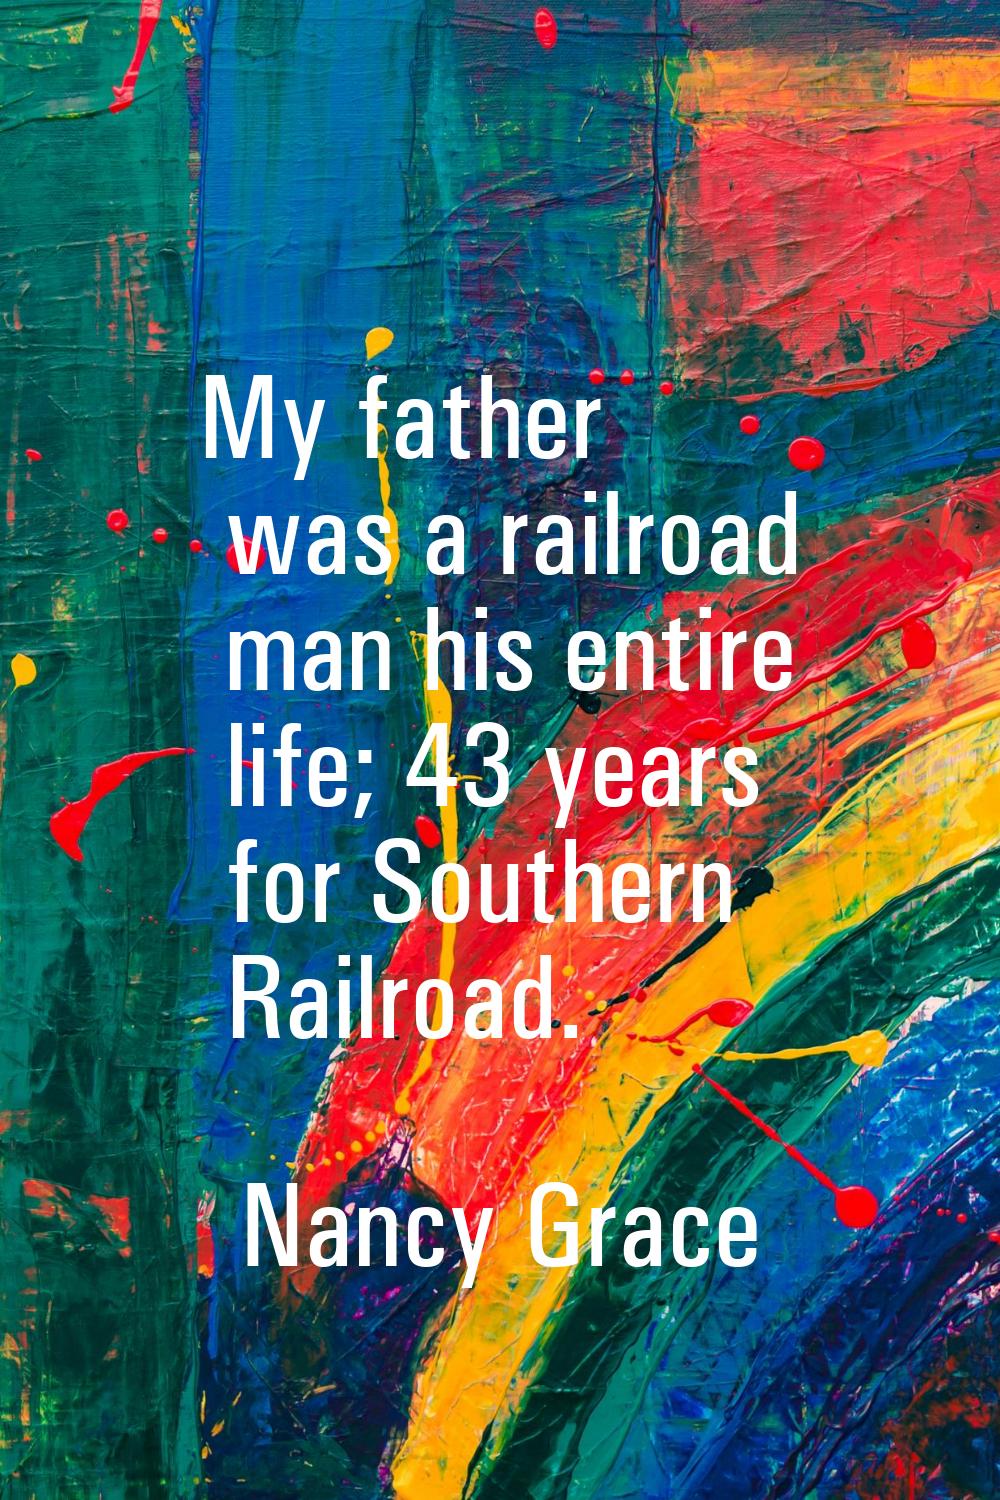 My father was a railroad man his entire life; 43 years for Southern Railroad.